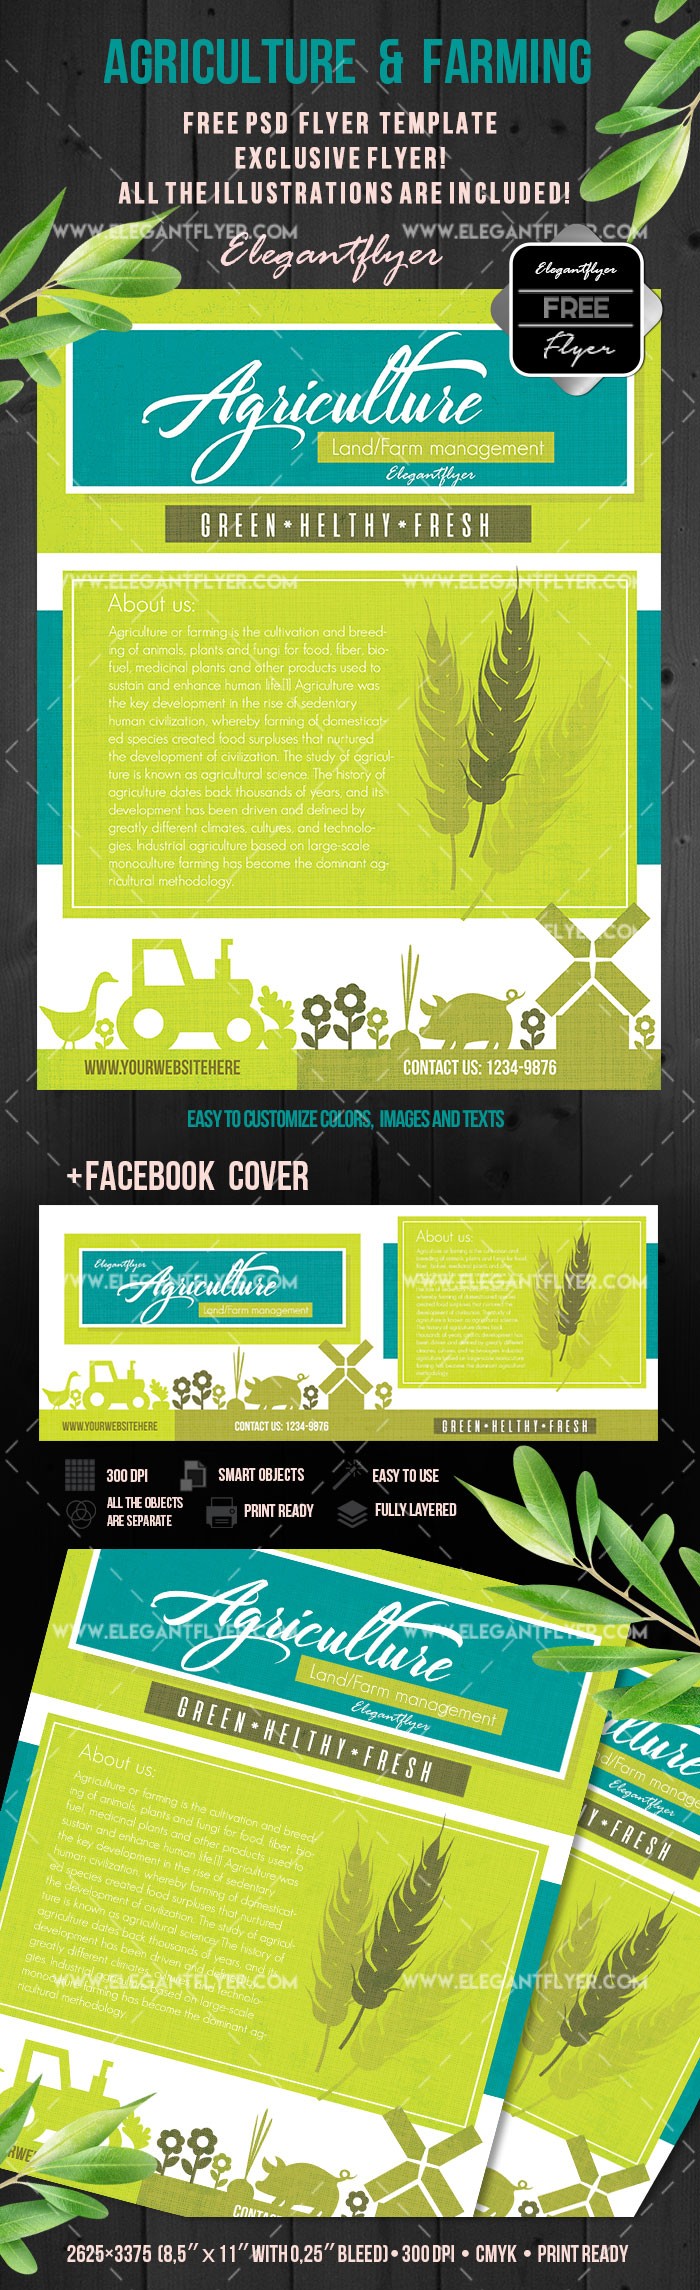 Agriculture and Farming by ElegantFlyer